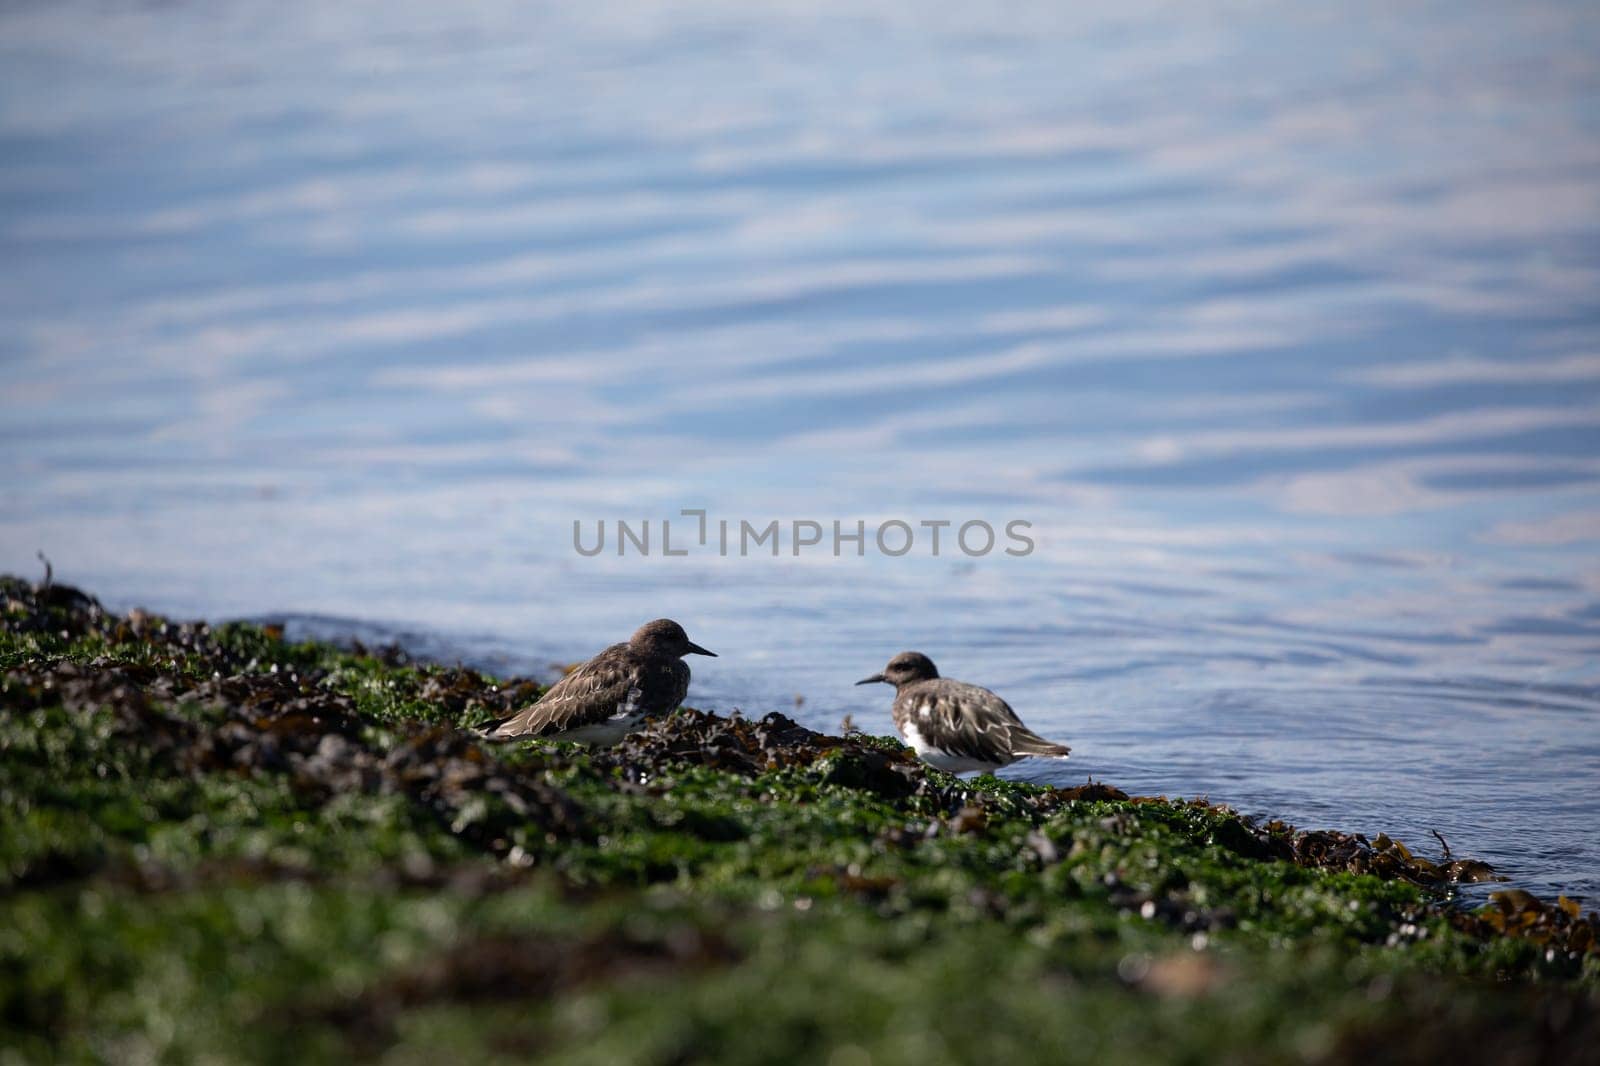 Shore birds walking along the edge of a beach covered in seaweed by Granchinho